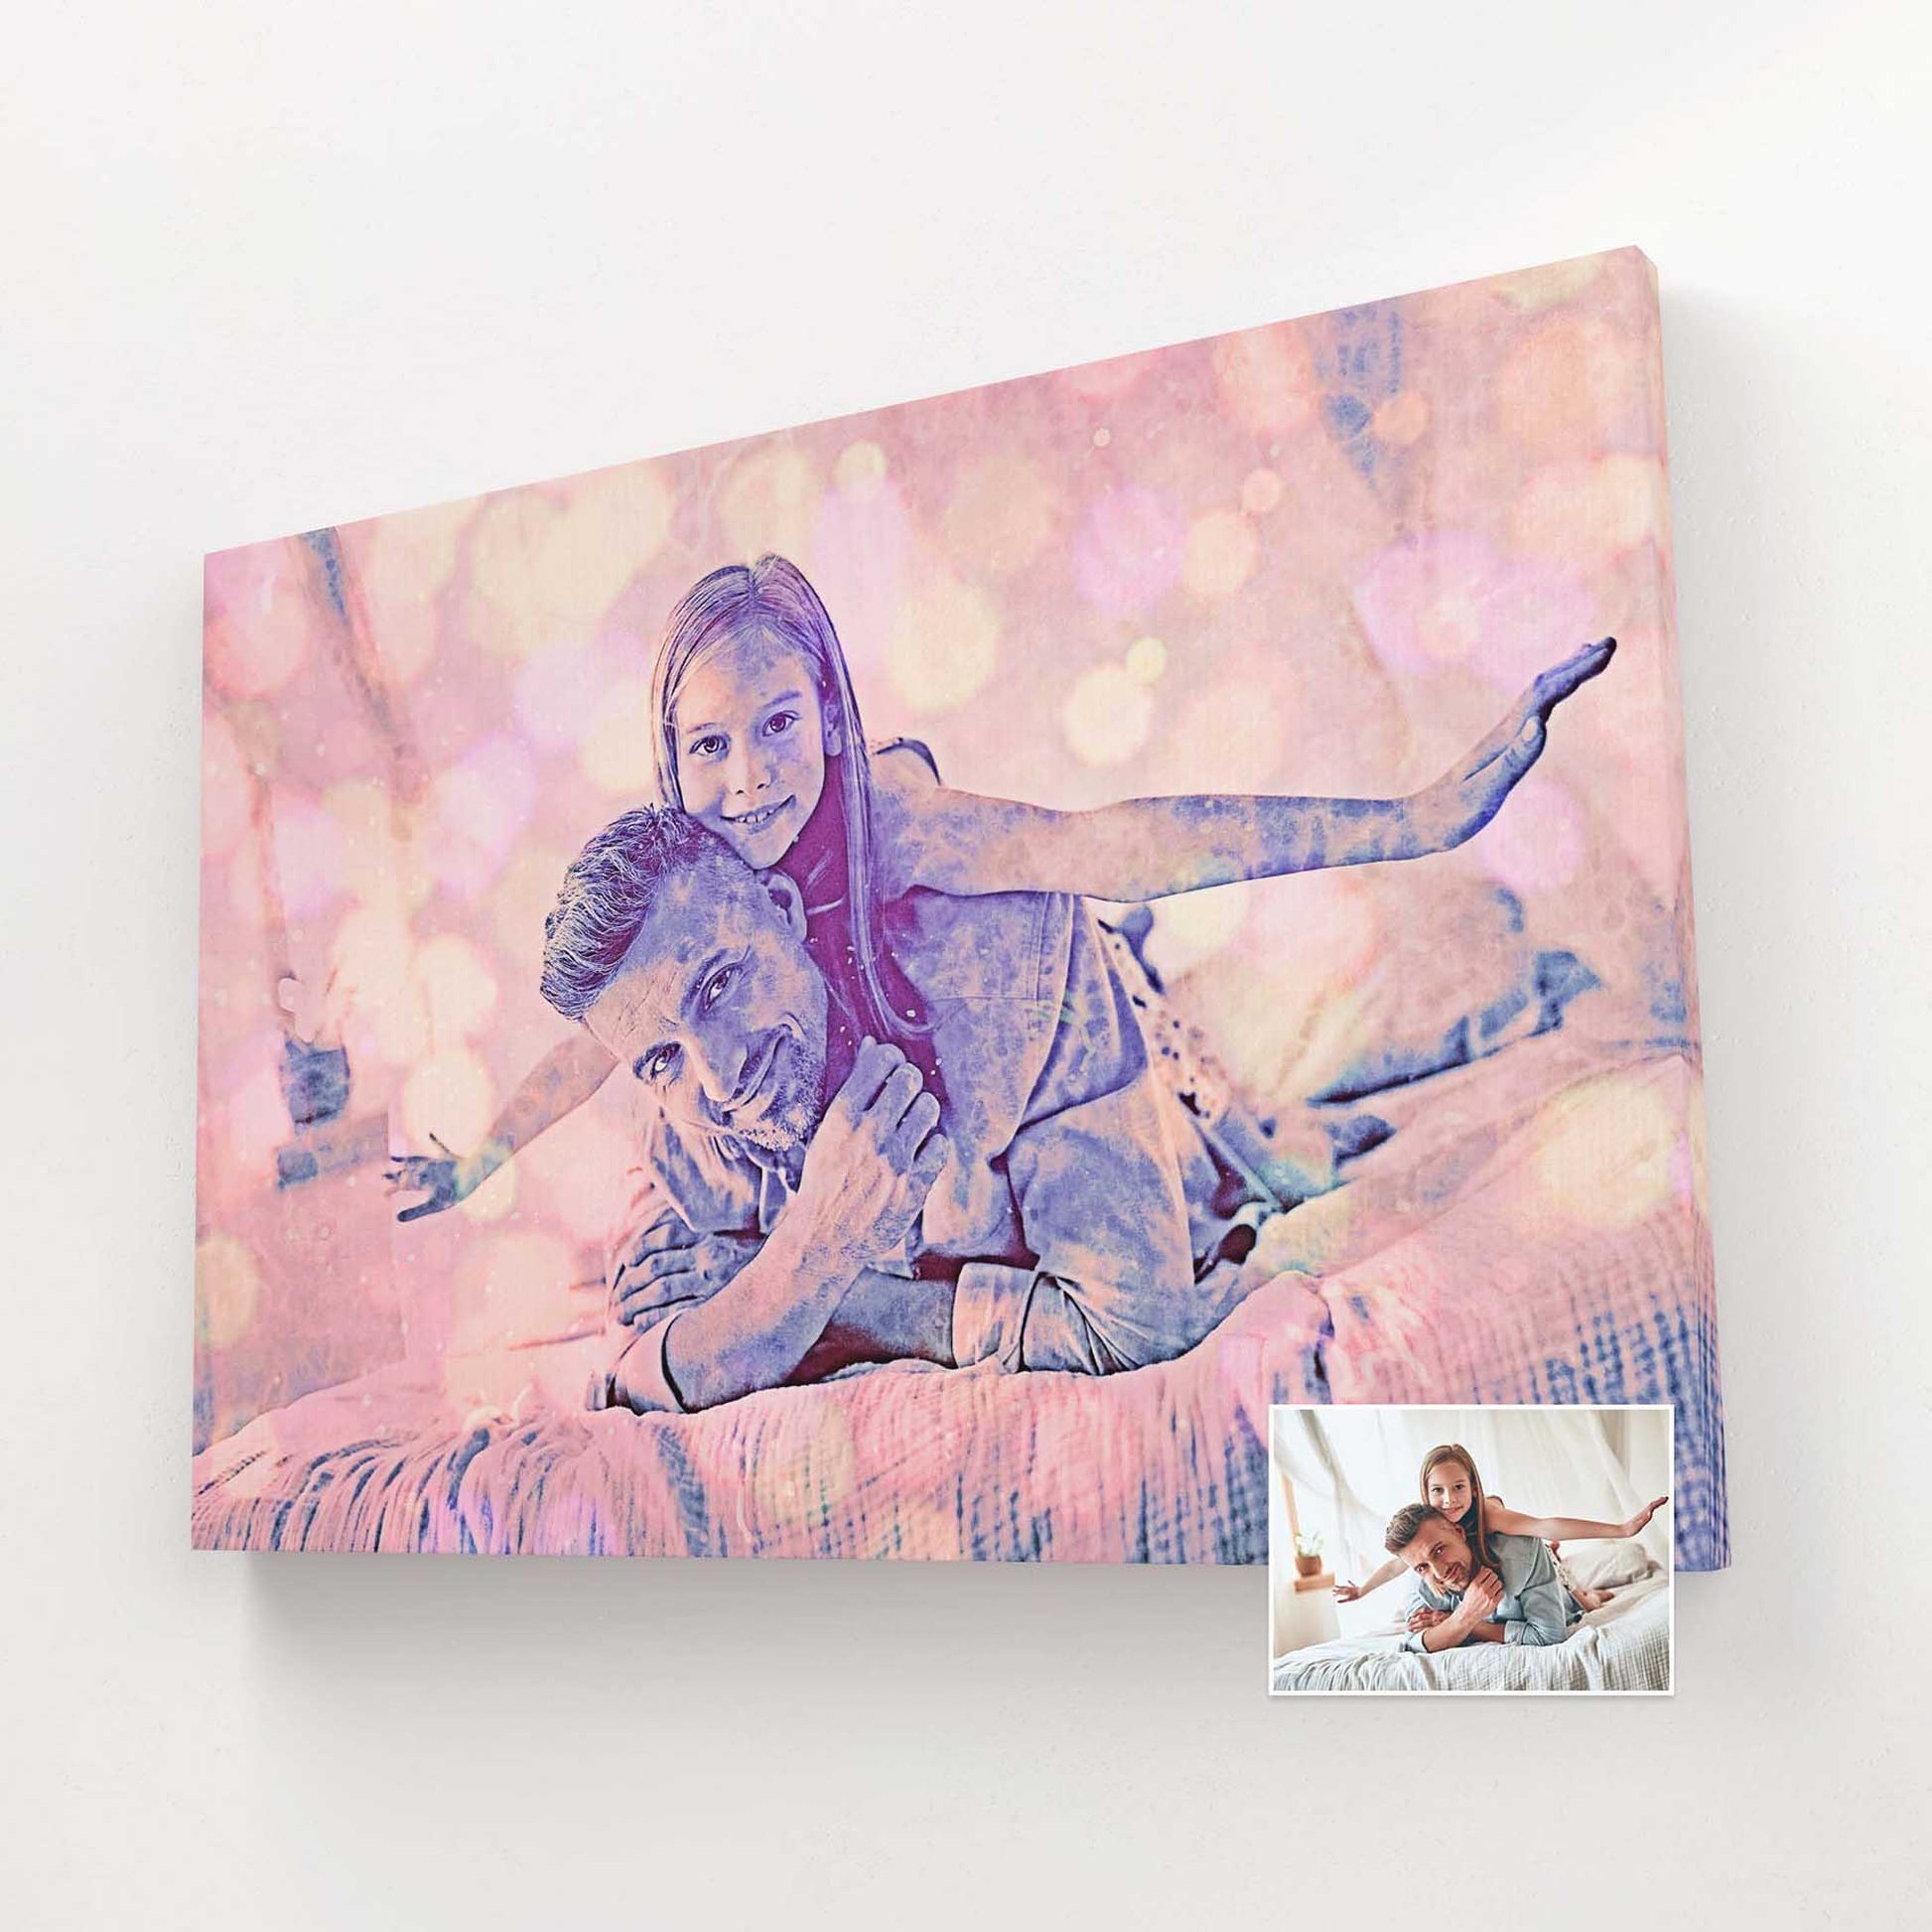 Unleash your inner artist with our Special Purple FX Canvas. This personalized print transforms any photo into a mesmerizing display of colors and shapes, creating an artwork that bursts with life and positive energy